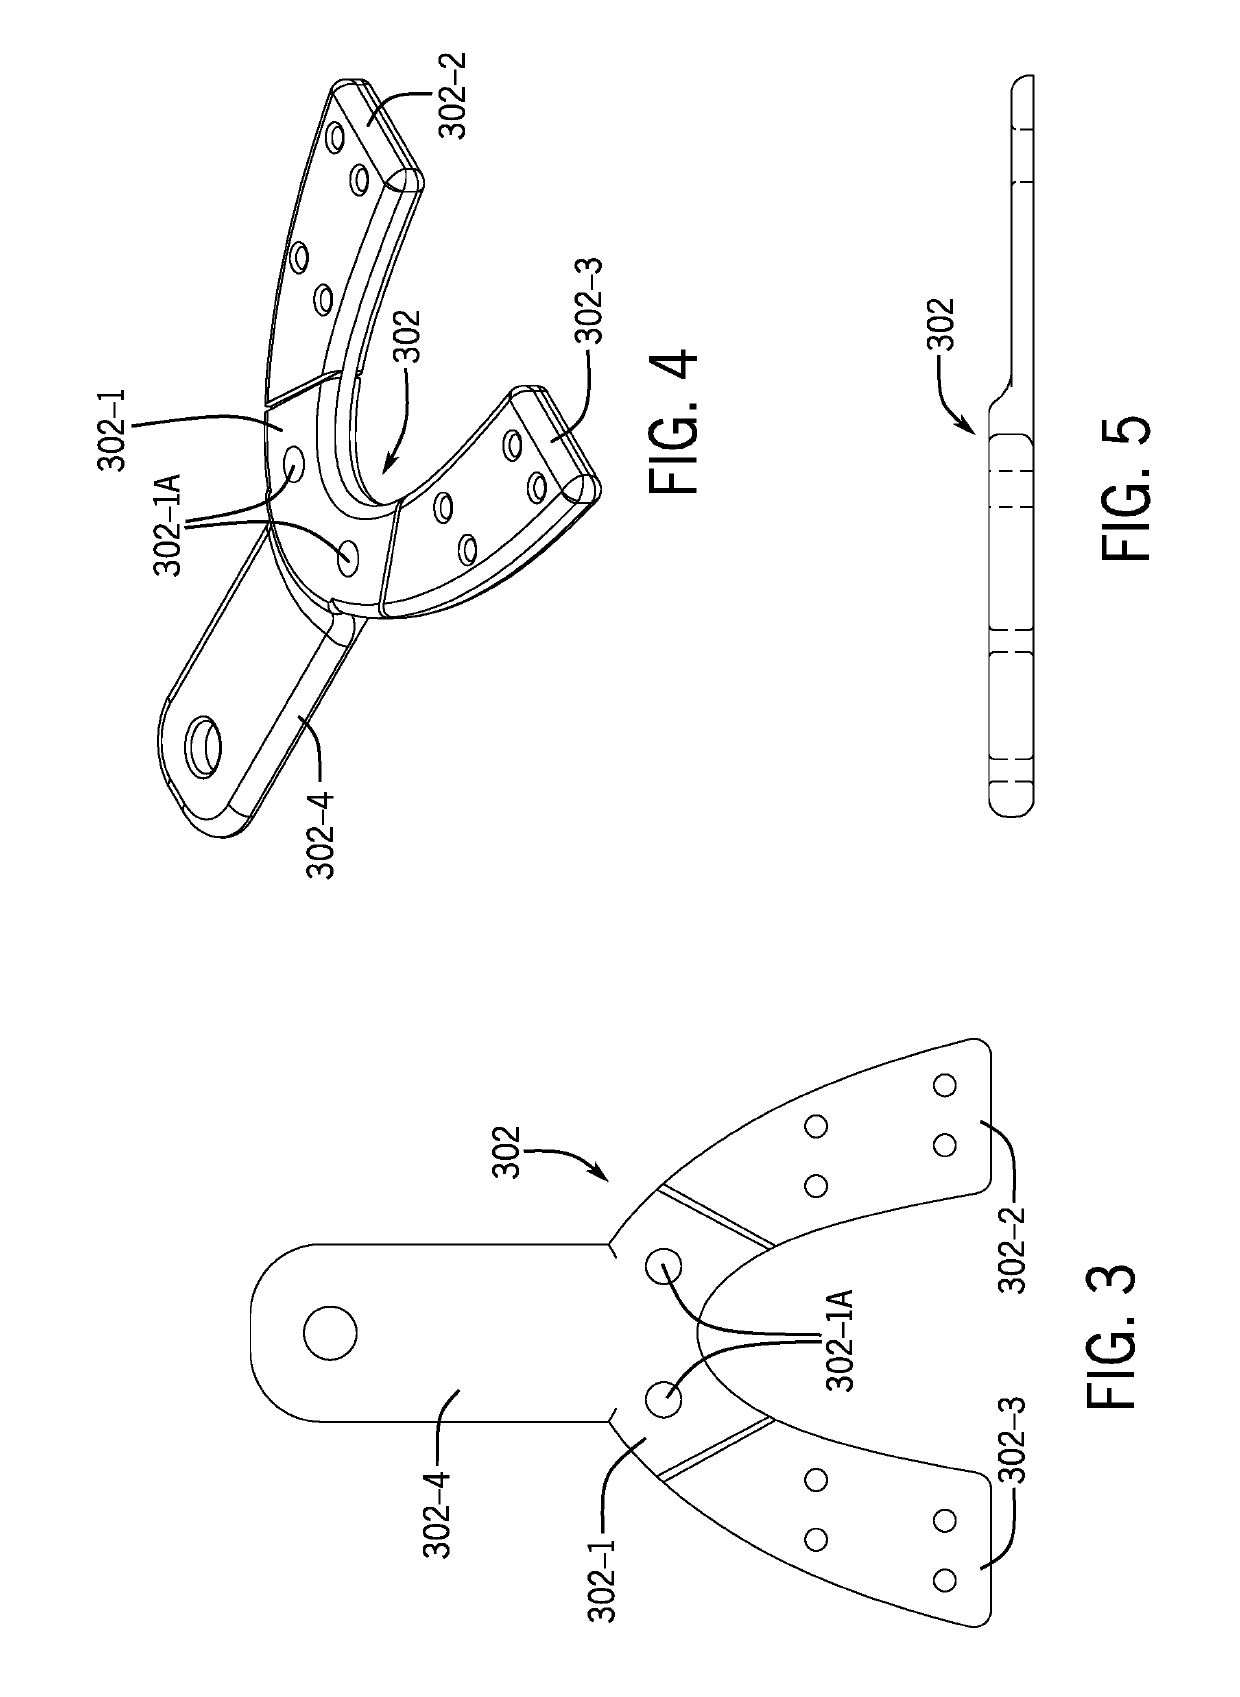 Open bite registration device for use in making a customized intraoral device for radiation treatment